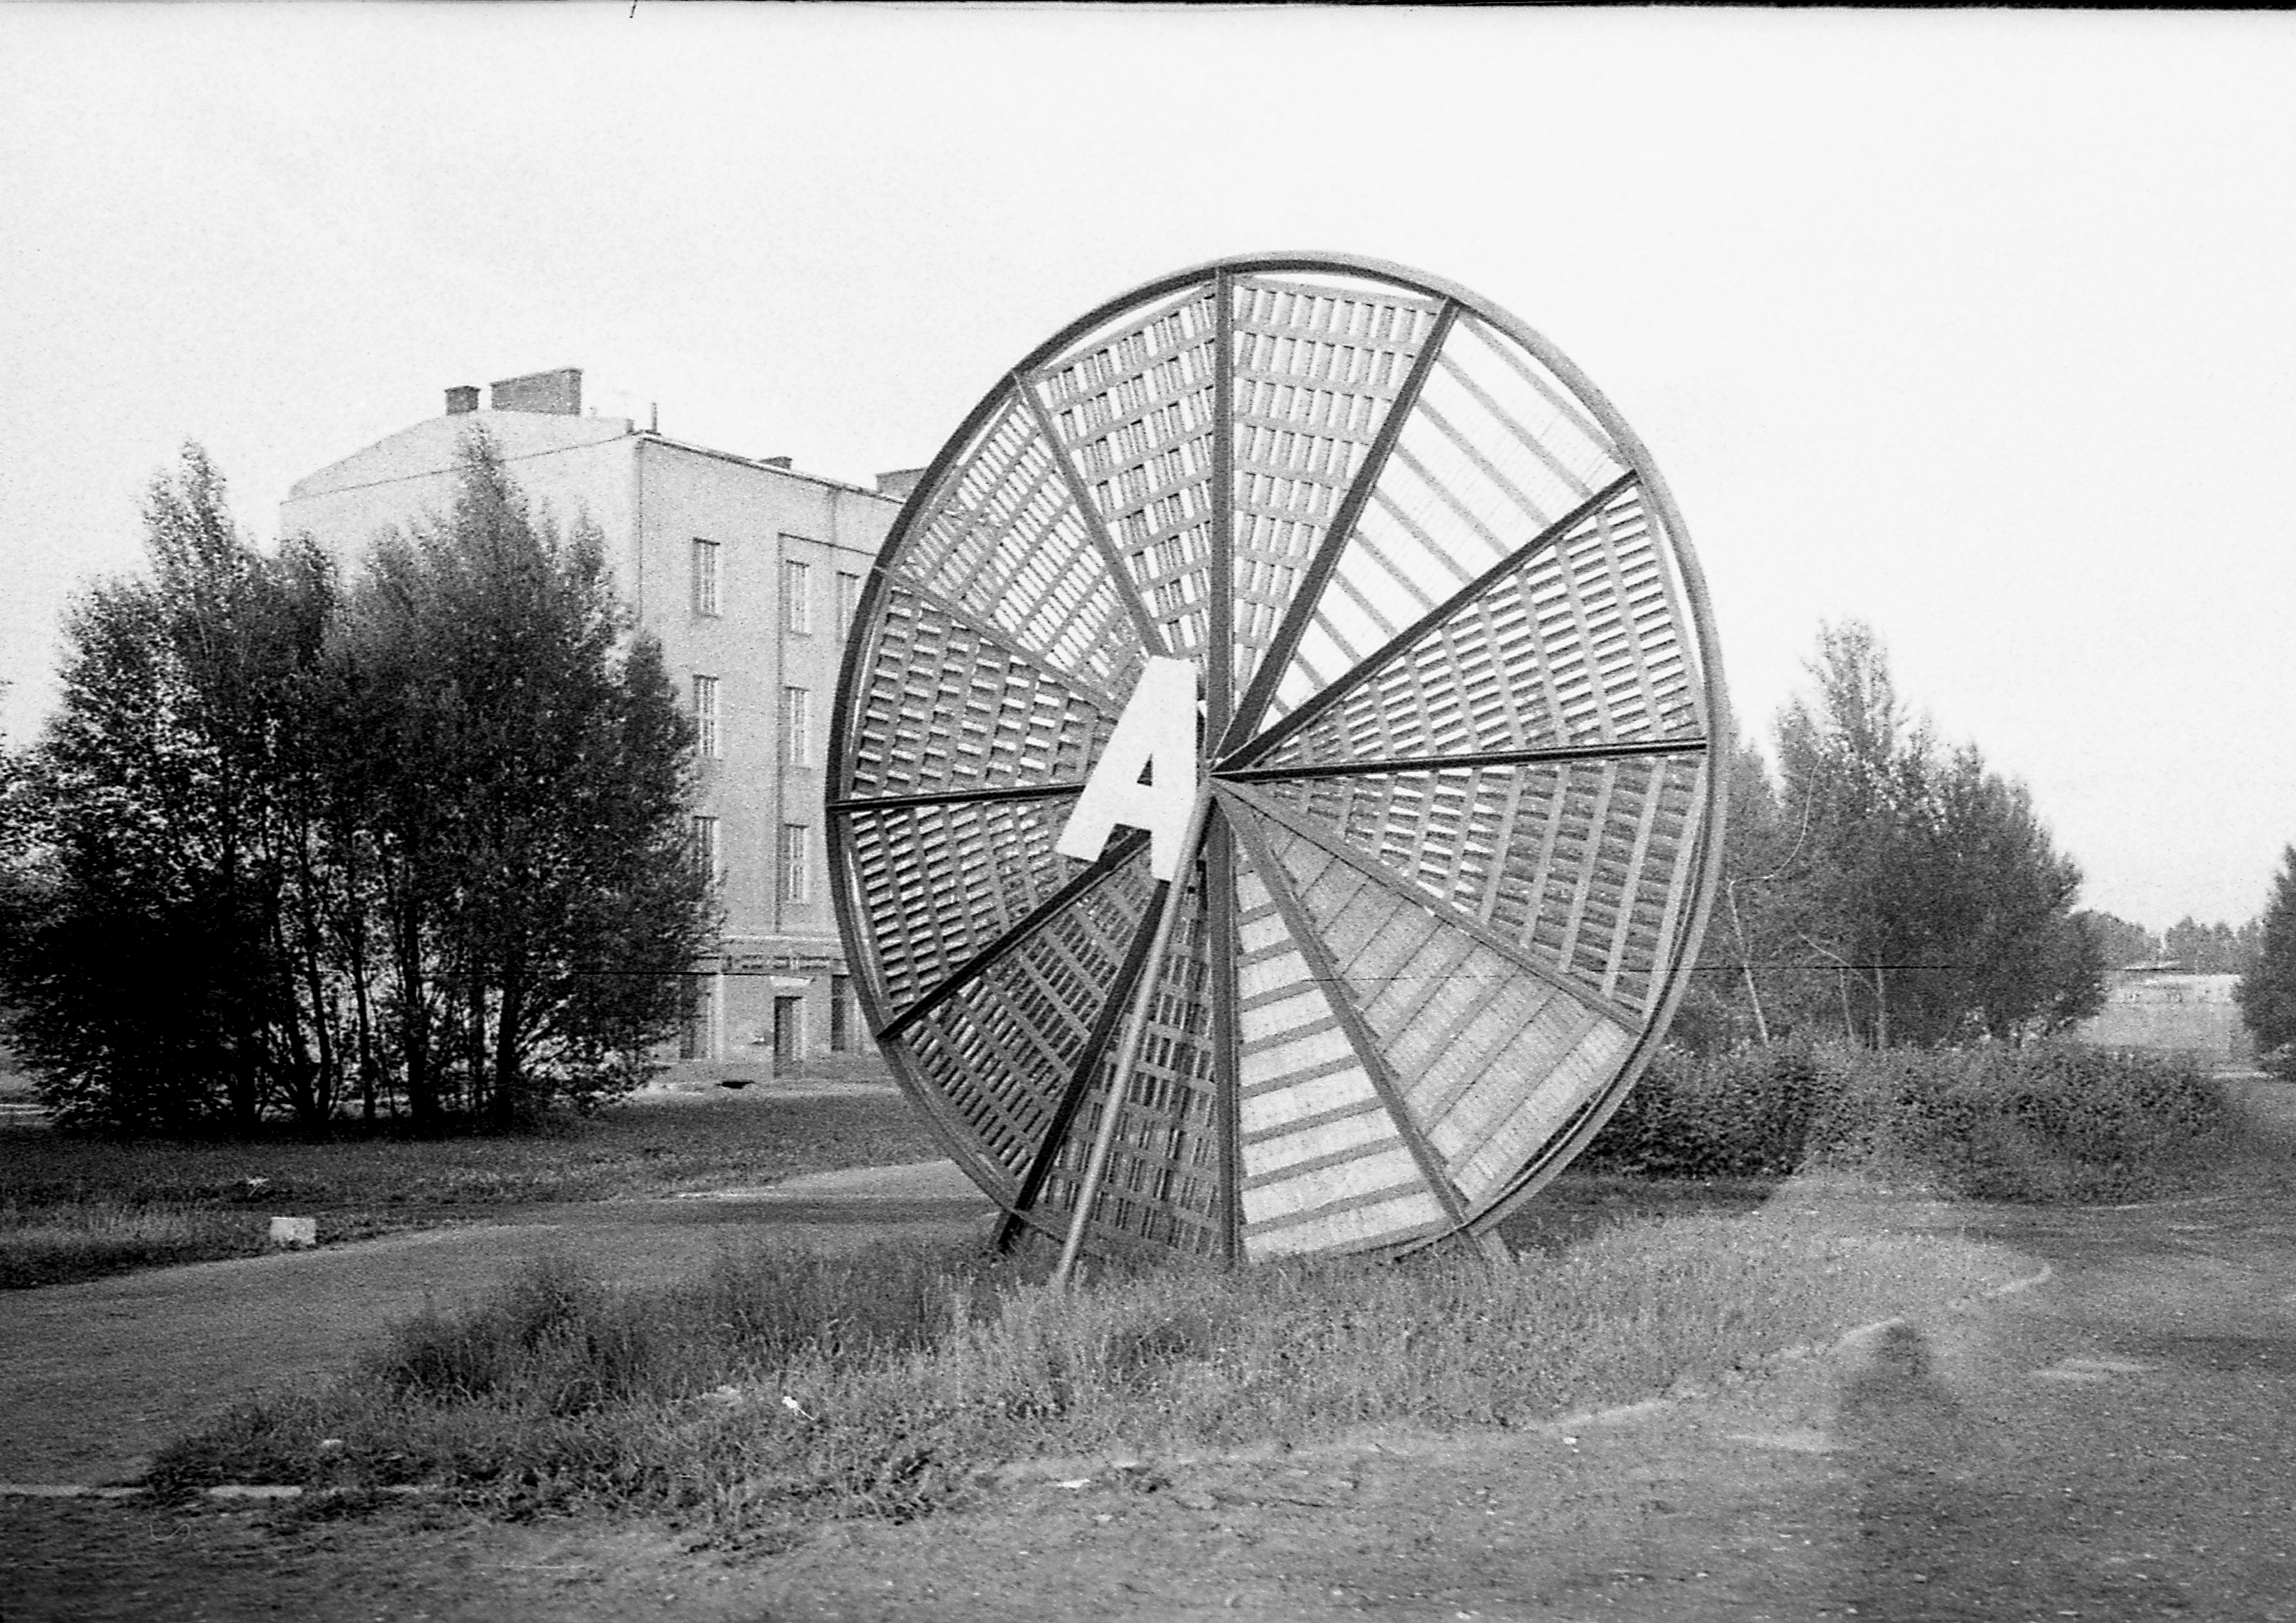 The photography was made in 1973 by Tomasz Sikorski during the Fifth Biennial of Spatial Forms in Elbląg. It shows the 6-metre high spatial form made by Antoni Sterczewski for the First Biennial in Elbląg in 1965.